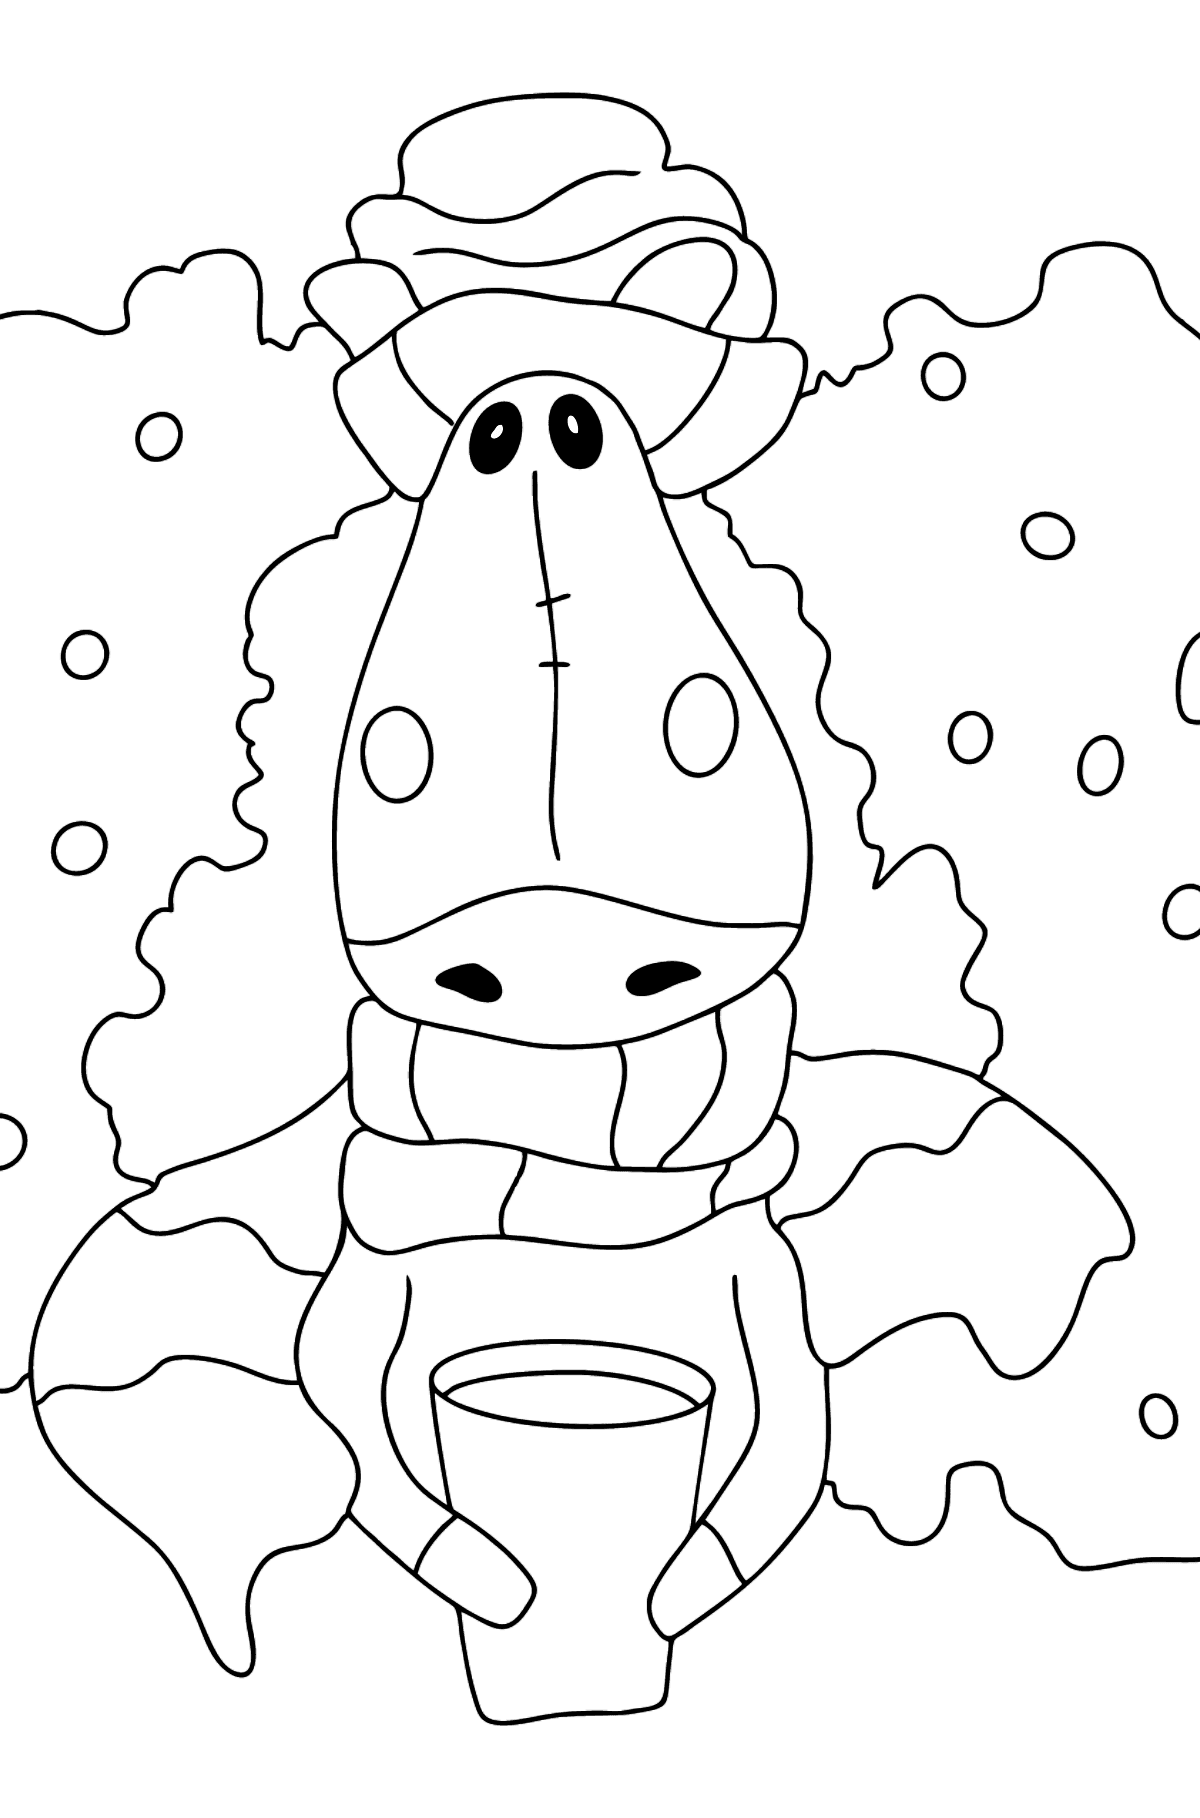 Coloring page a horse in a scarf - Coloring Pages for Kids